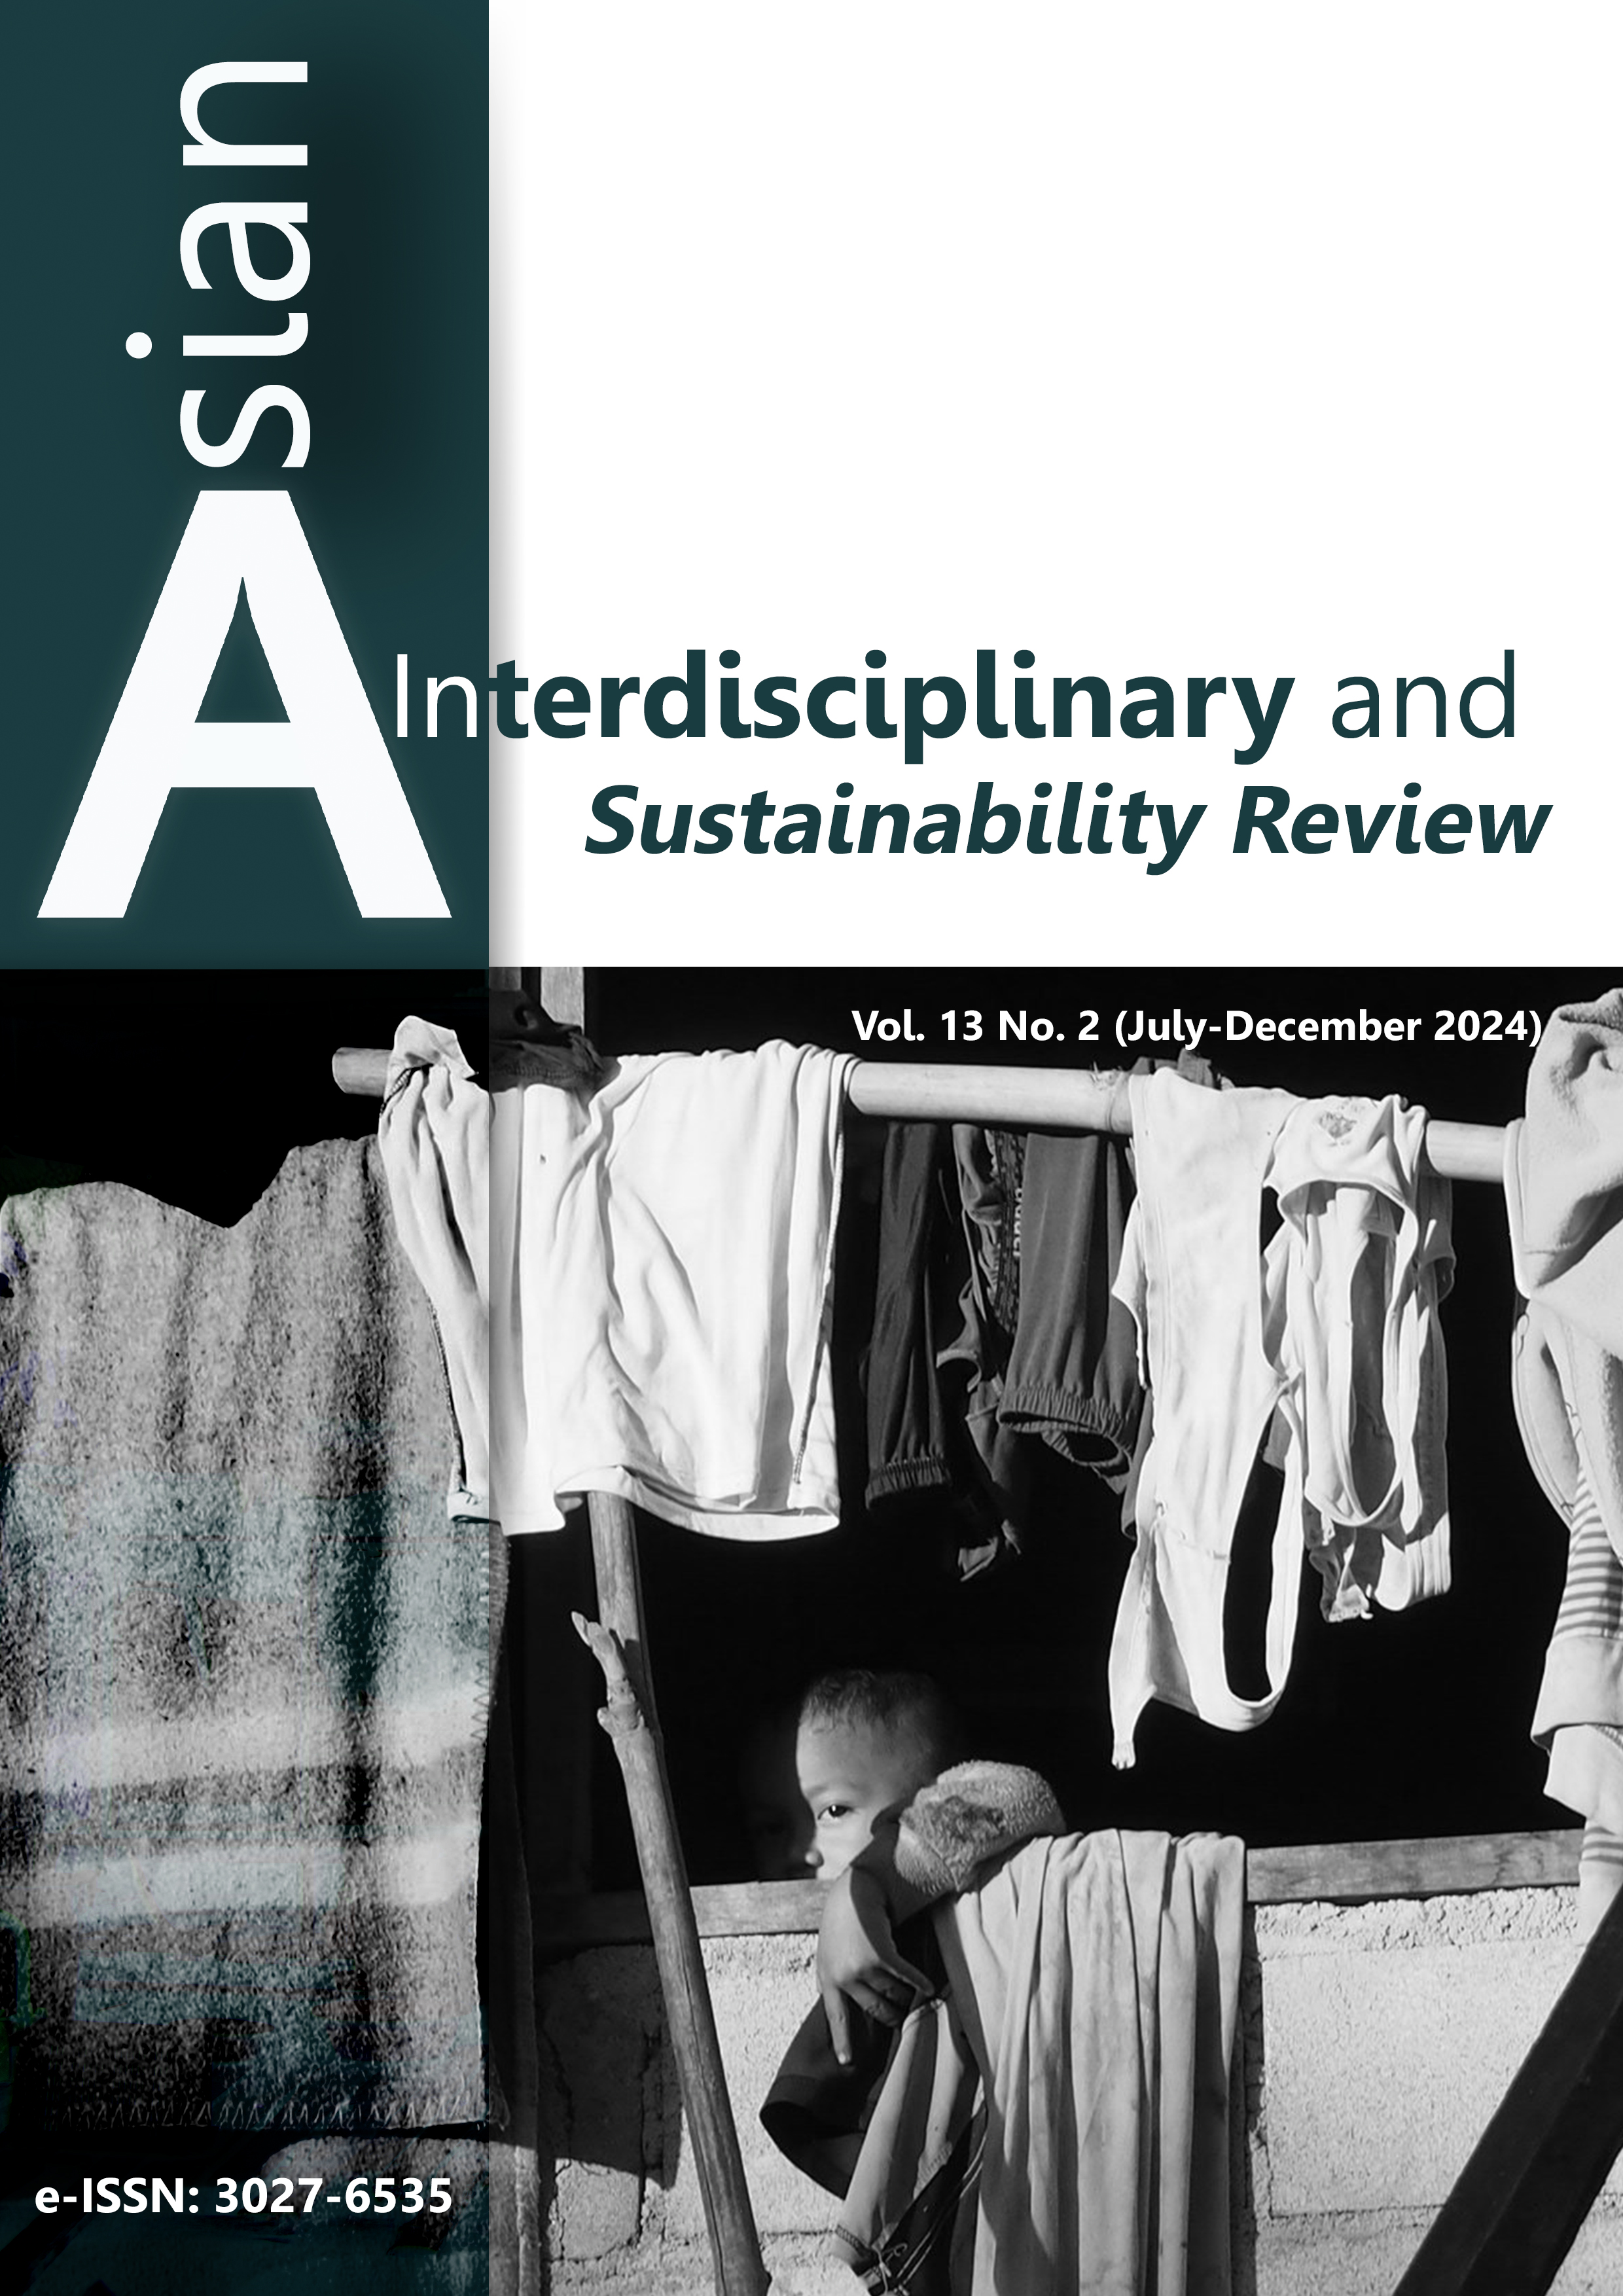 					View Vol. 13 No. 2 (2024): Asian Interdisciplinary and Sustainability Review
				